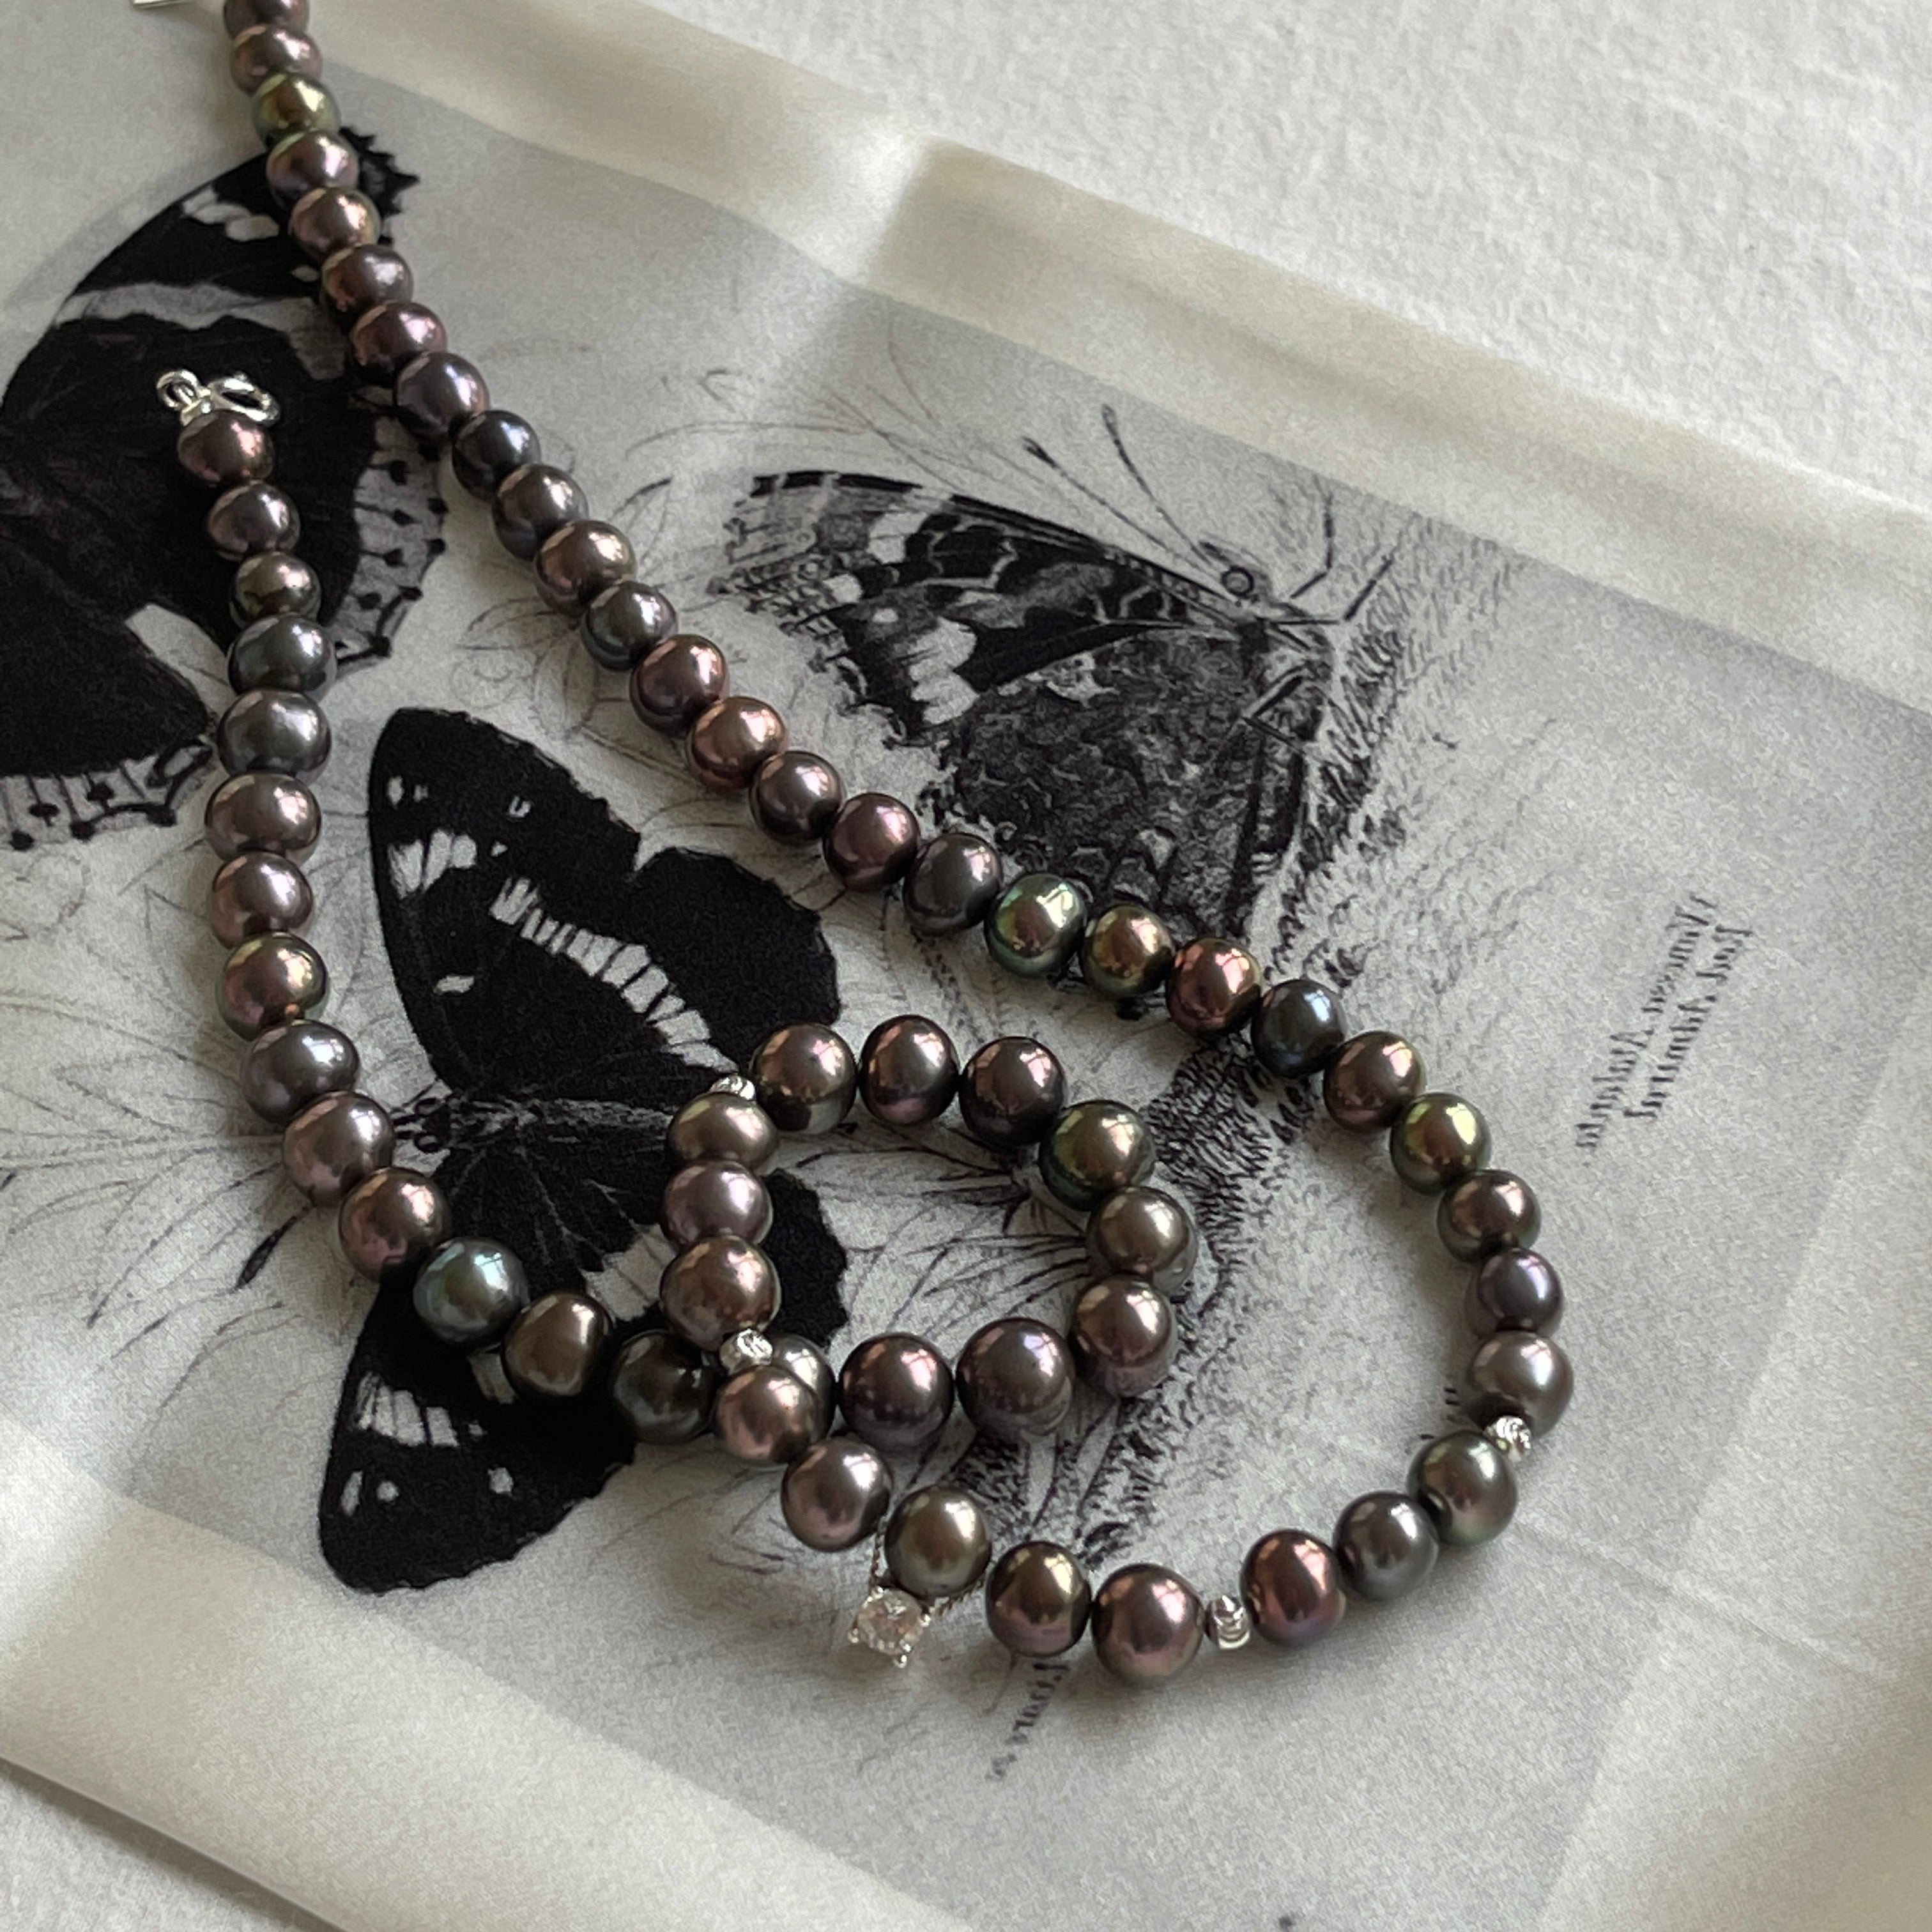 S925 Silver Shiny Black Pearl Handmade Necklace/ Clavicle Chain/ Unisex